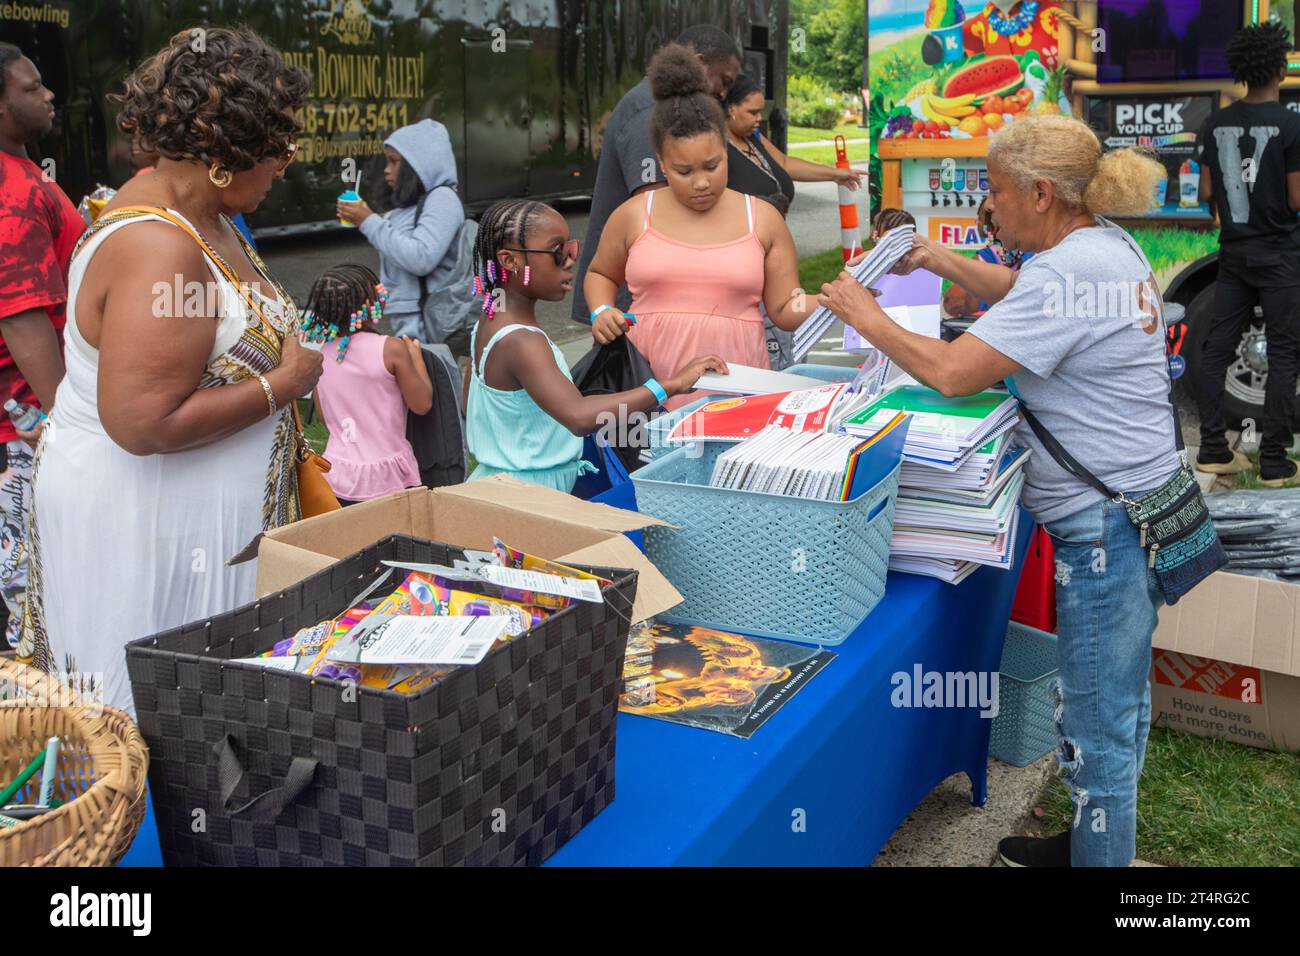 Highland Park, Michigan - The nonprofit Homework House organized a Back to School Day. The event offered free school supplies, along with food and gam Stock Photo